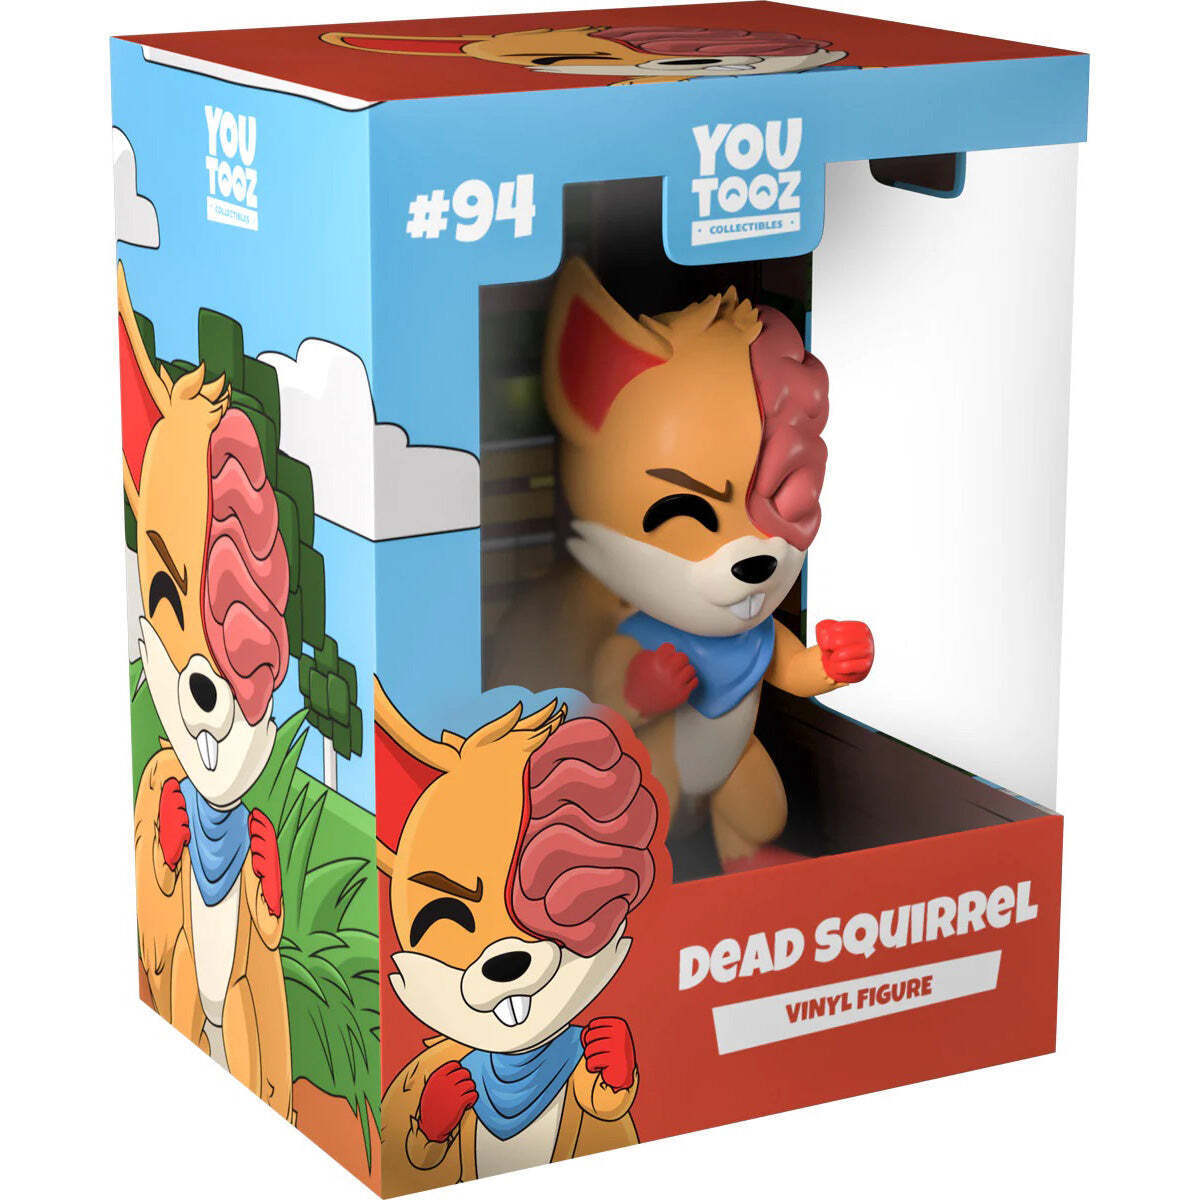 Youtooz: Dead Squirrel Vinyl Figure [Toys, Ages 15+, #94]